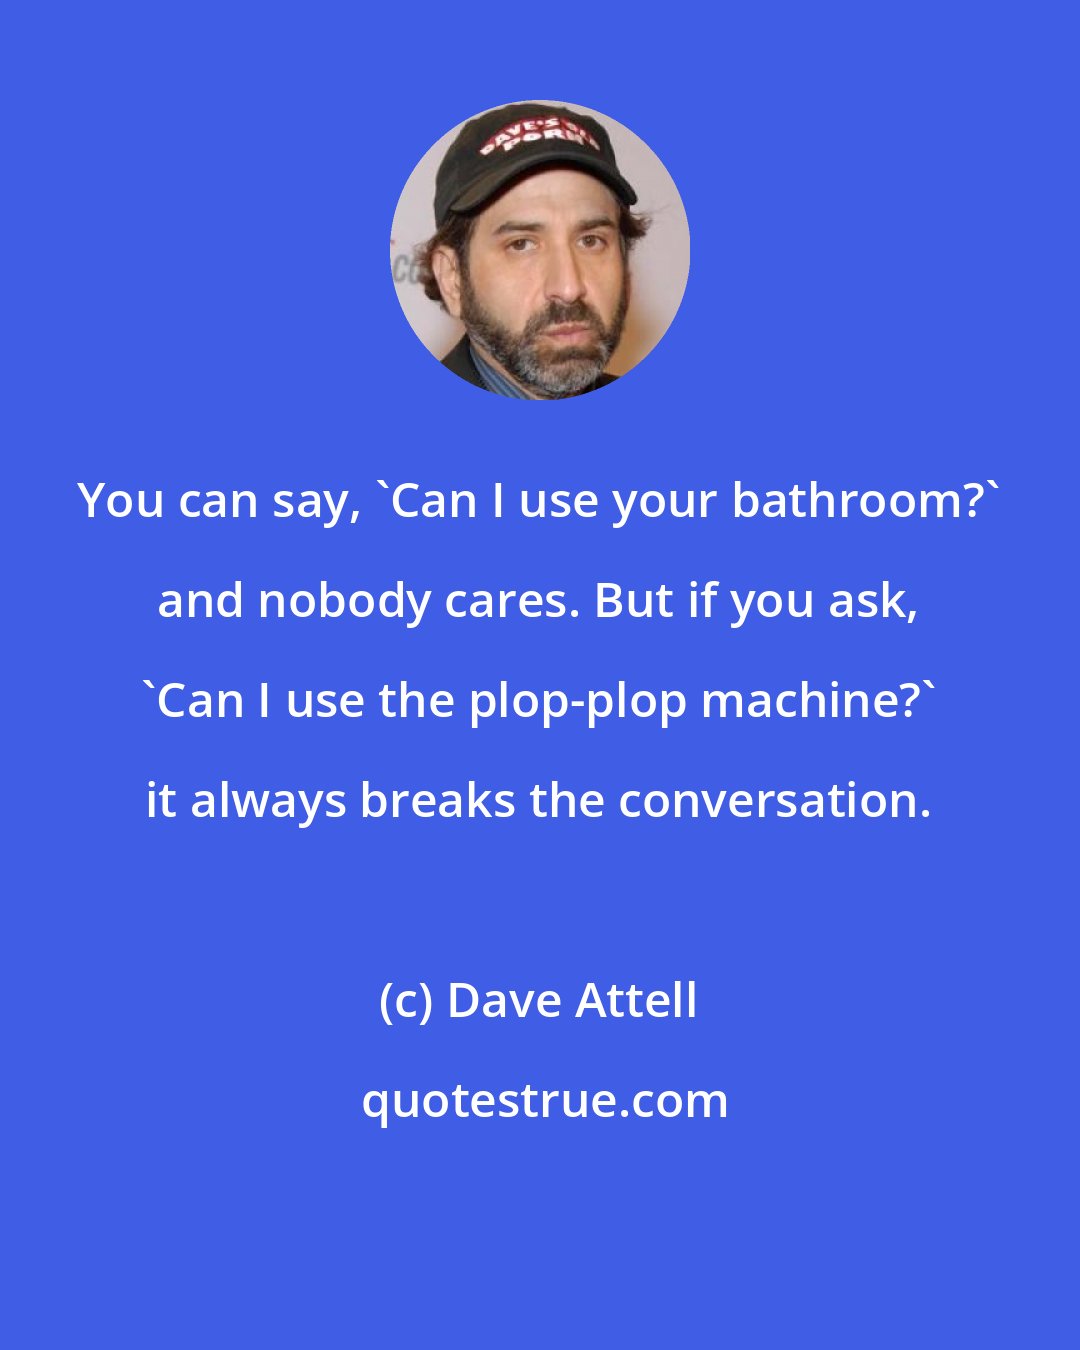 Dave Attell: You can say, 'Can I use your bathroom?' and nobody cares. But if you ask, 'Can I use the plop-plop machine?' it always breaks the conversation.